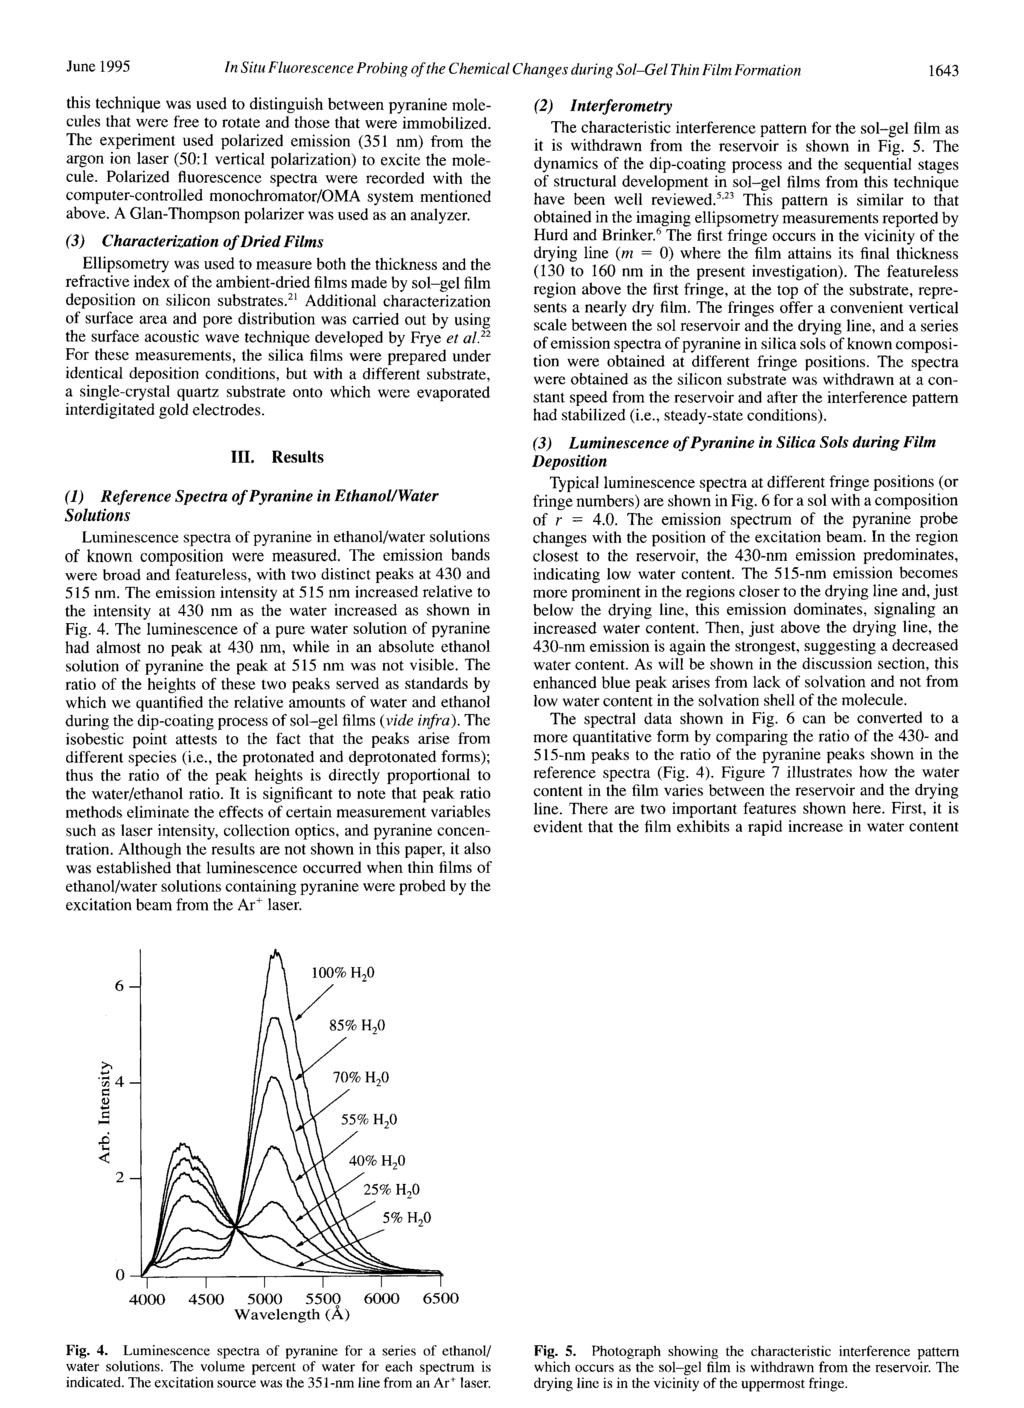 June 1995 n Situ Fluorescence Probing of the Chemical Changes during Sol-Gel Thin Film Formation 1643 this technique was used to distinguish between pyranine molecules that were free to rotate and